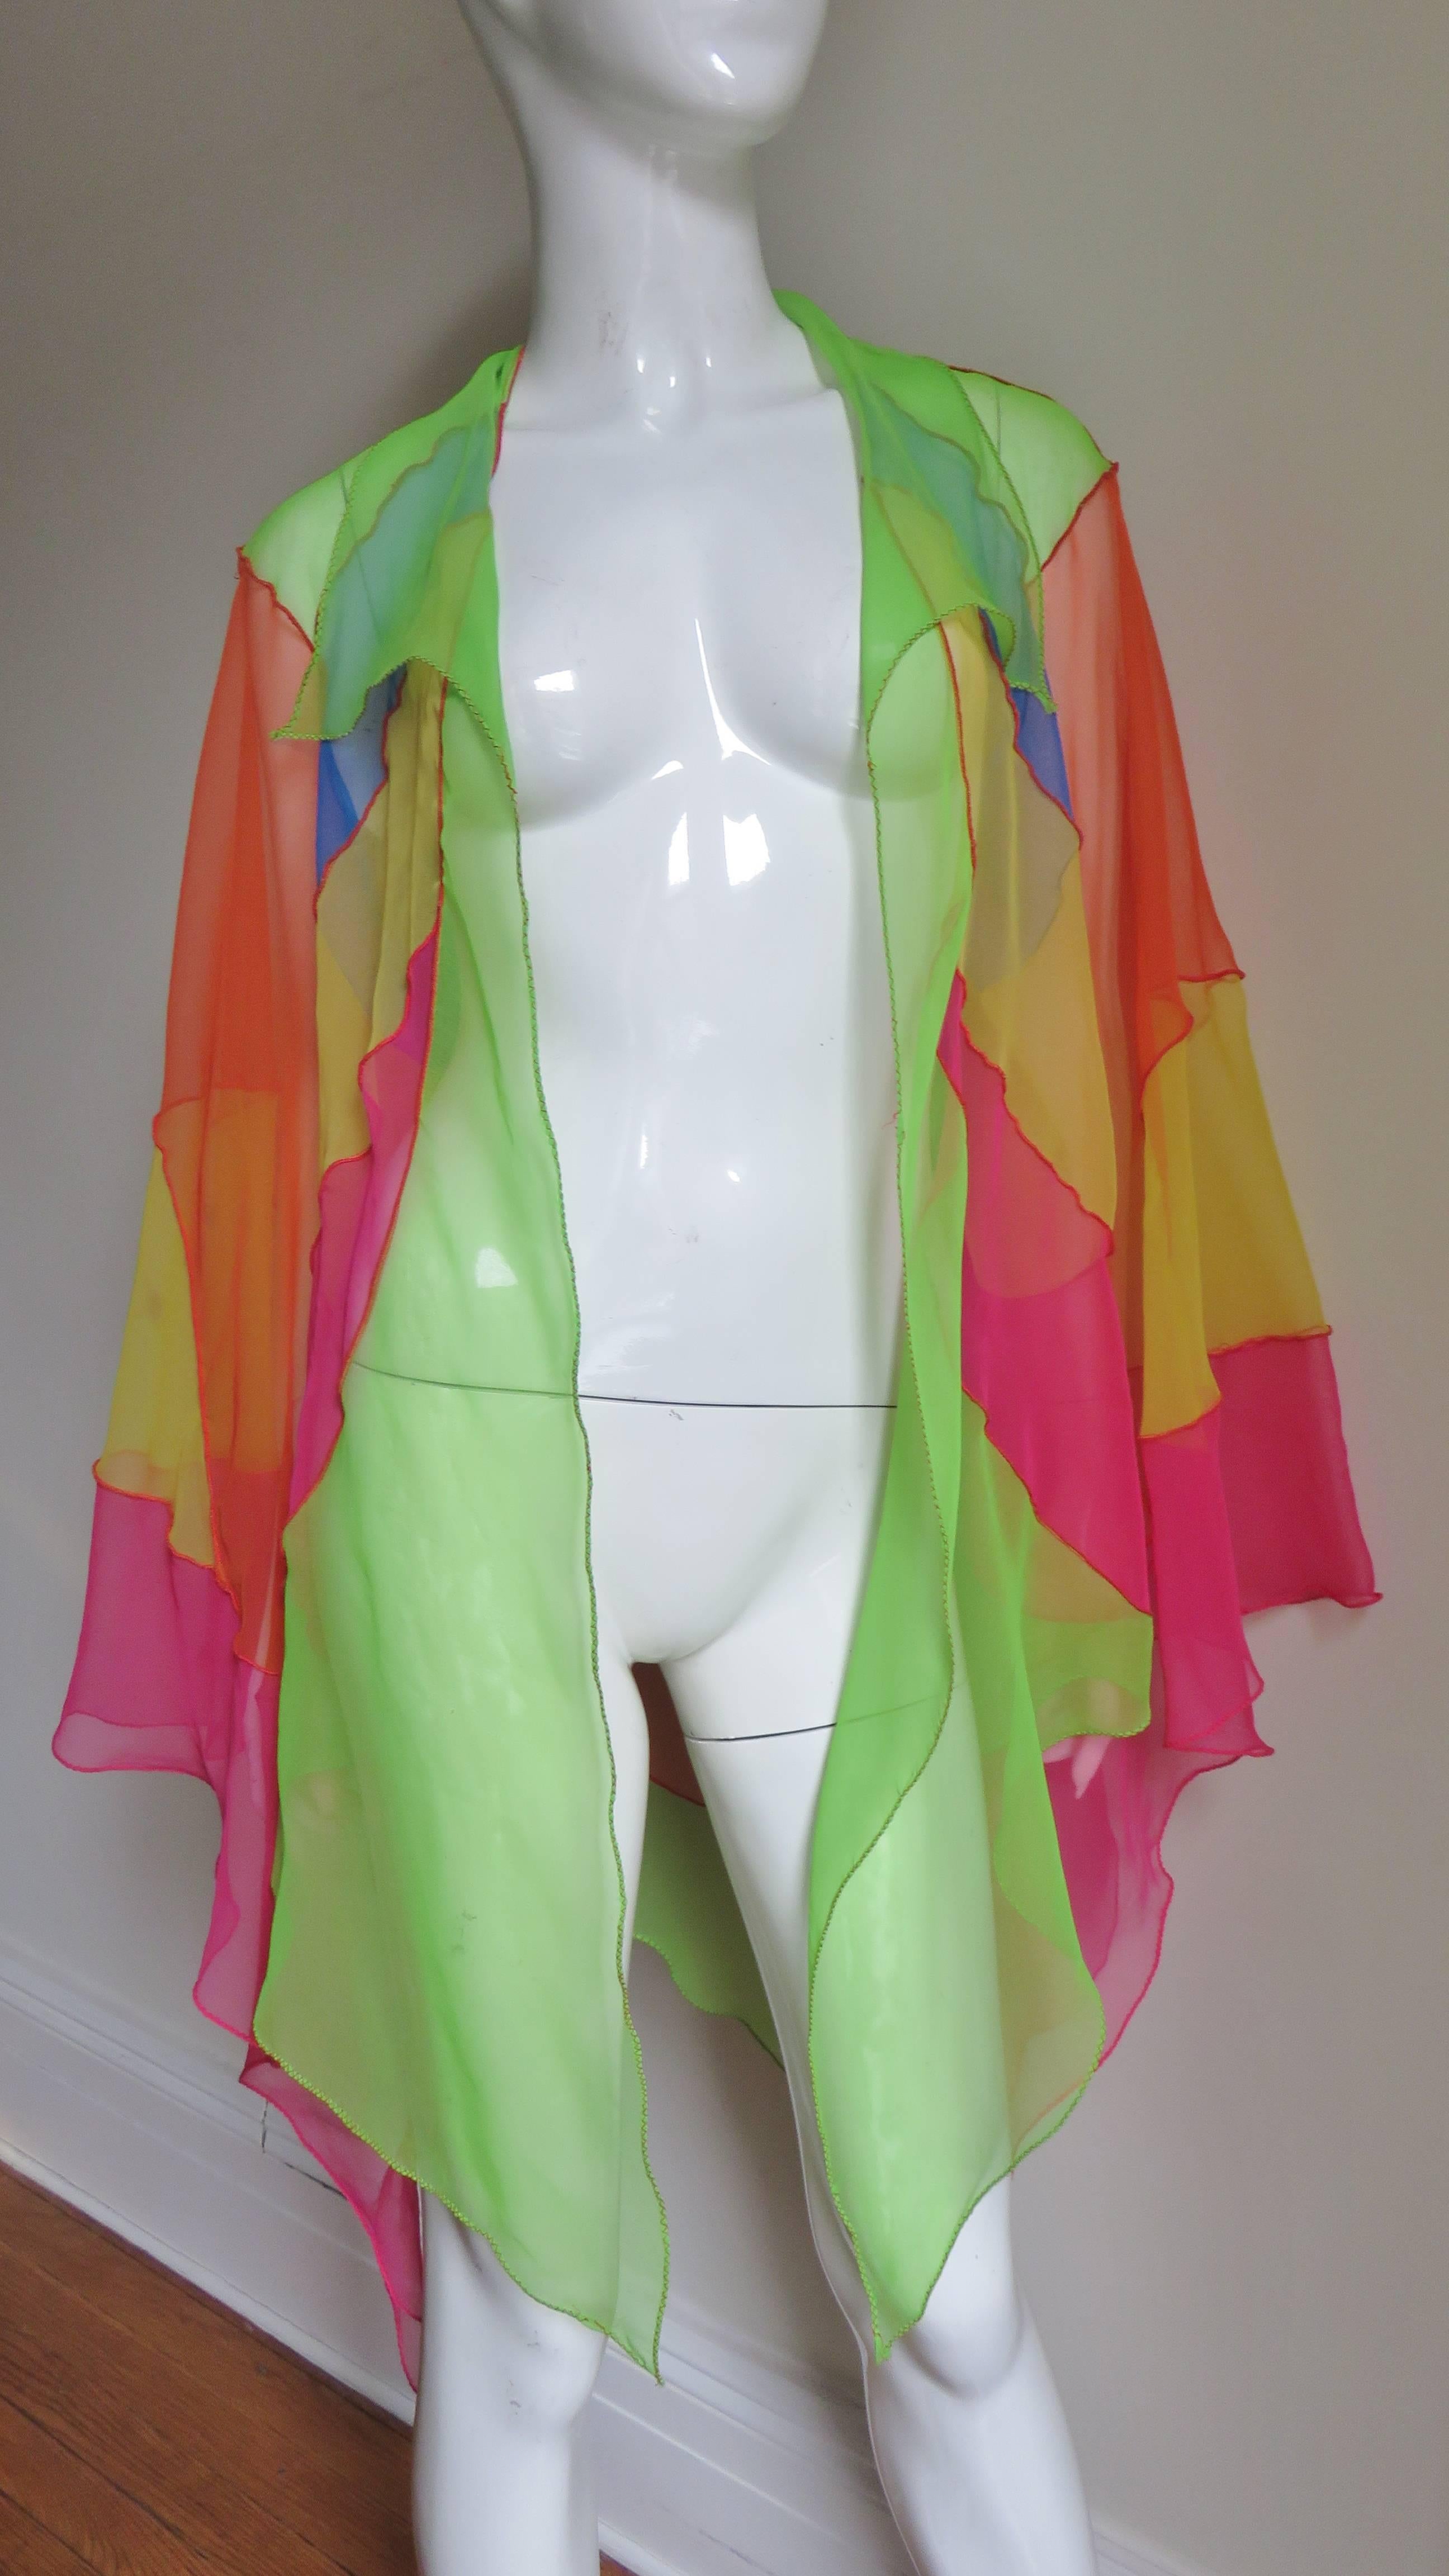 A gorgeous sheer silk color block stain glass effect patchwork of colorful shapes joined together with red stitching forming an open draped jacket from Stephen Burrows.  It has a long shirt collar, long full draping bell sleeves with points, and an